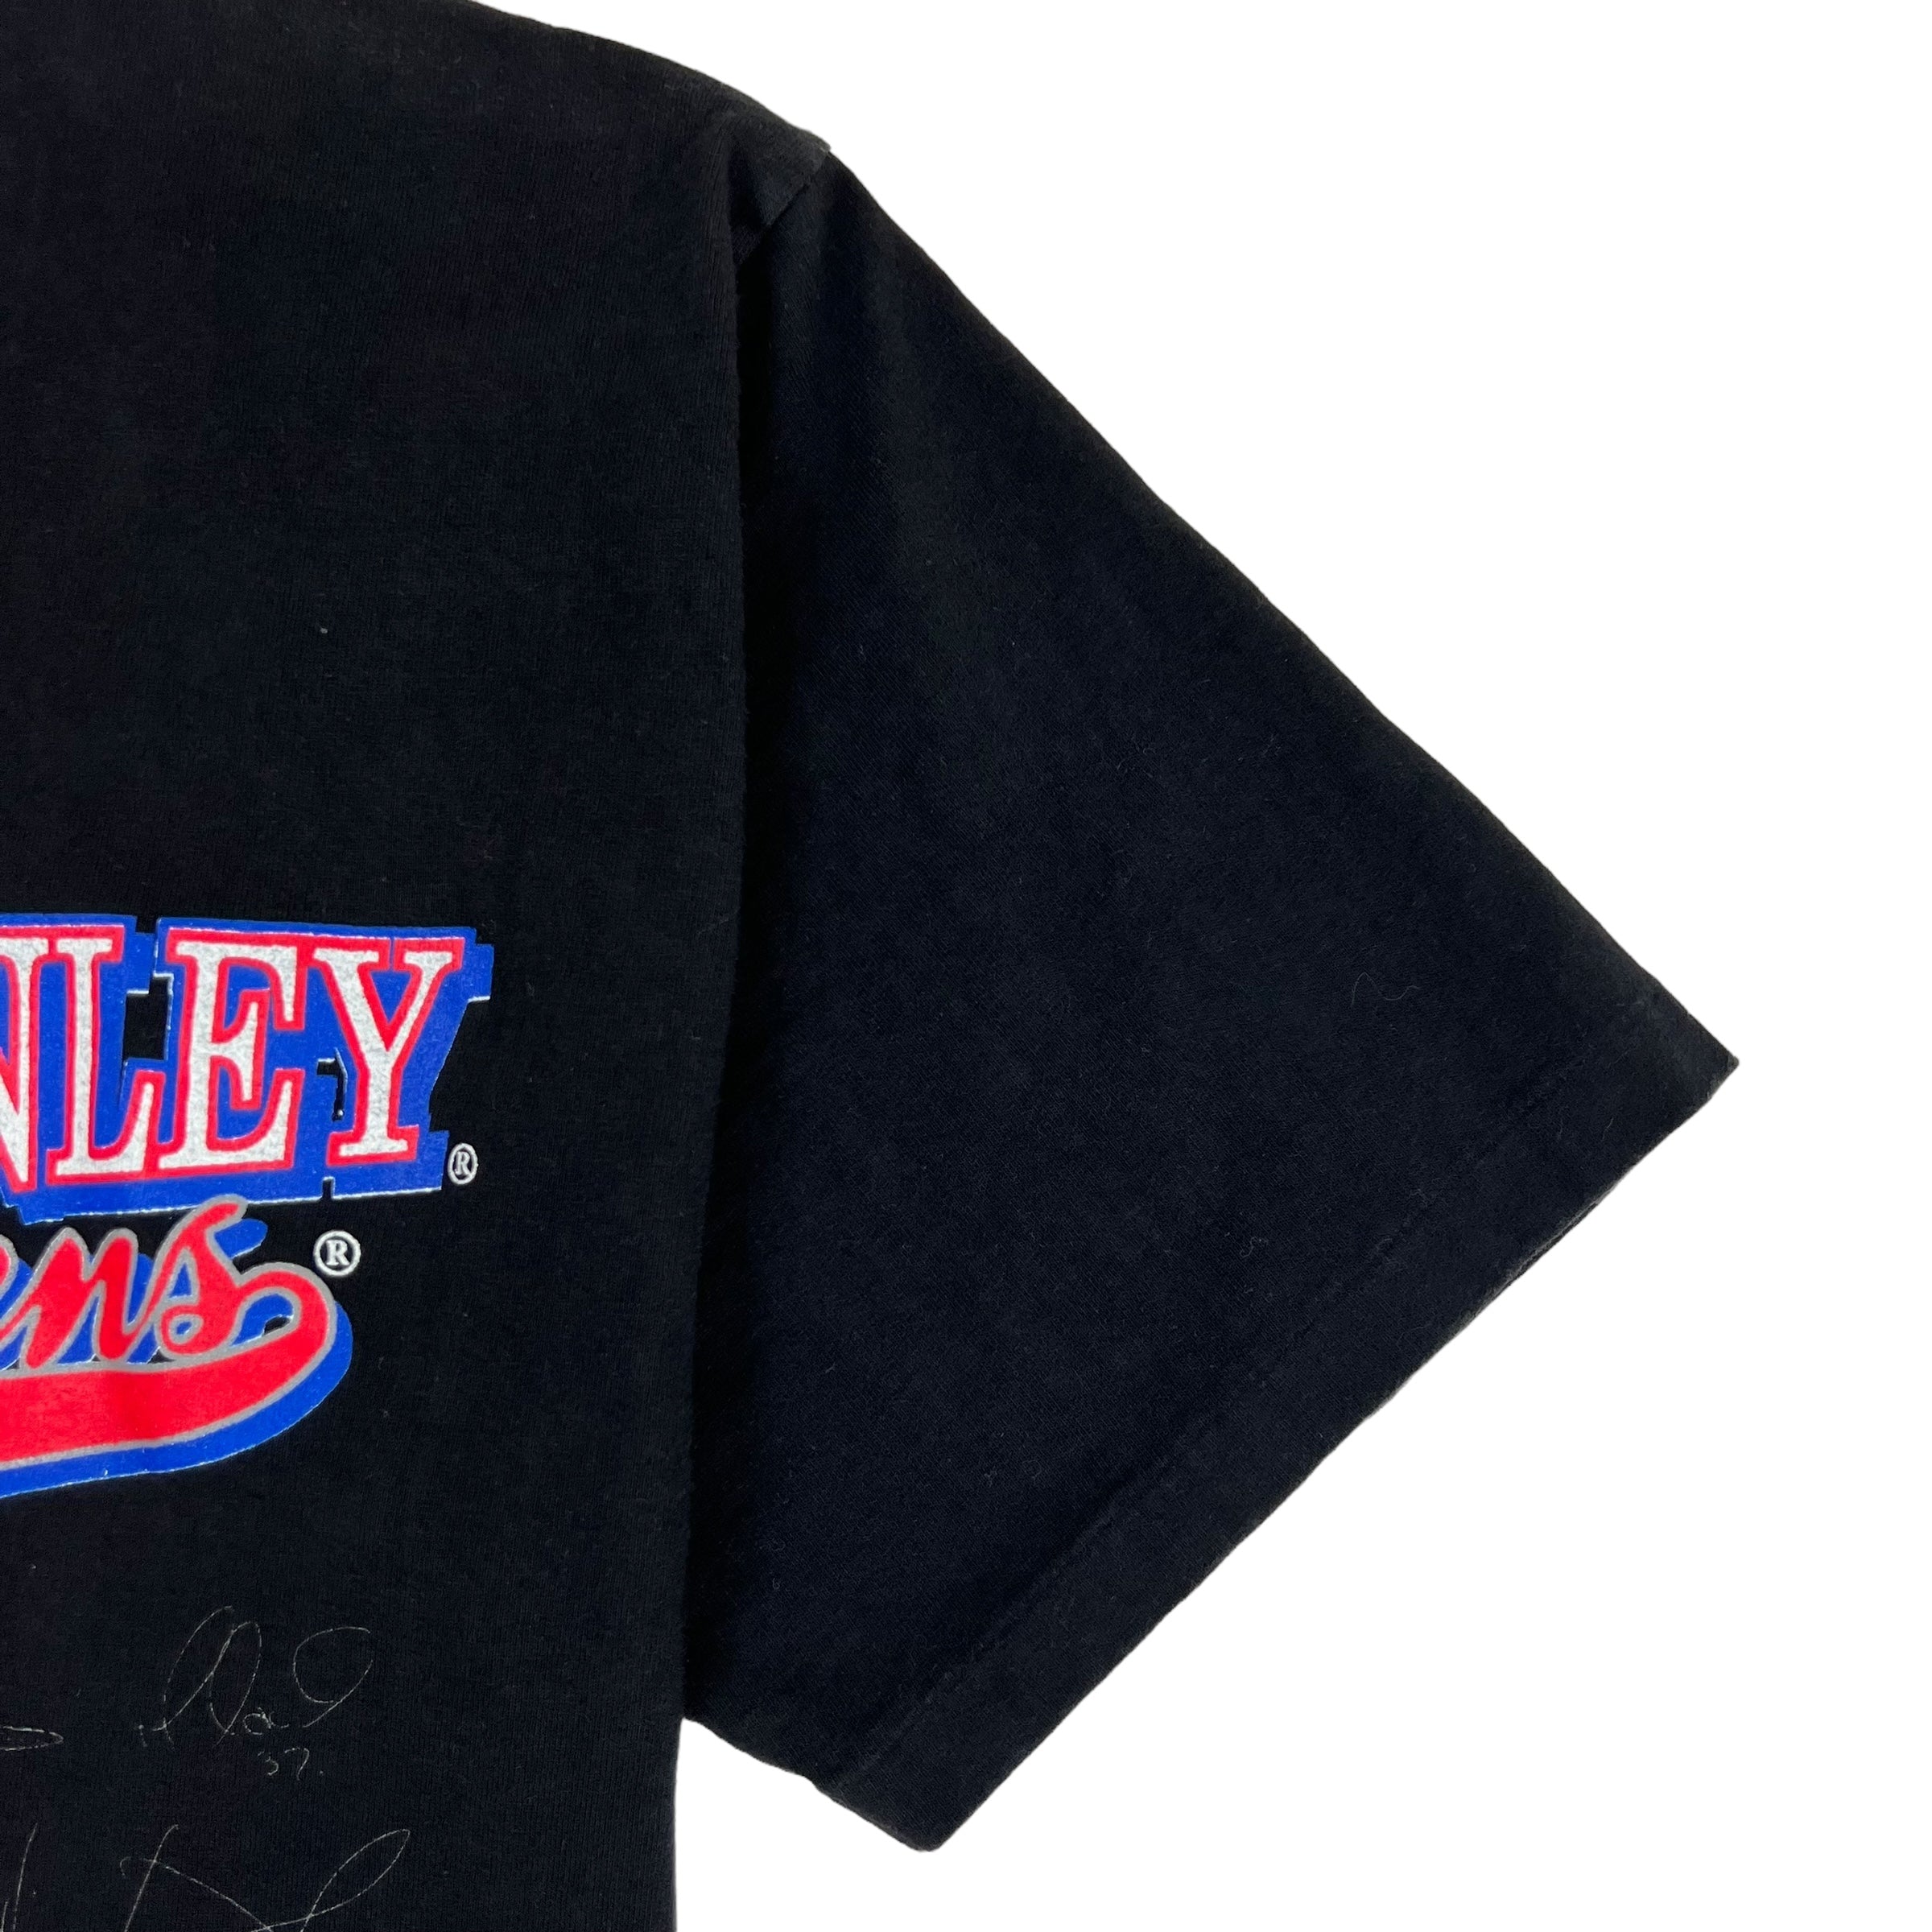 1993 Montreal Canadiens Stanley Cup Champ Tee